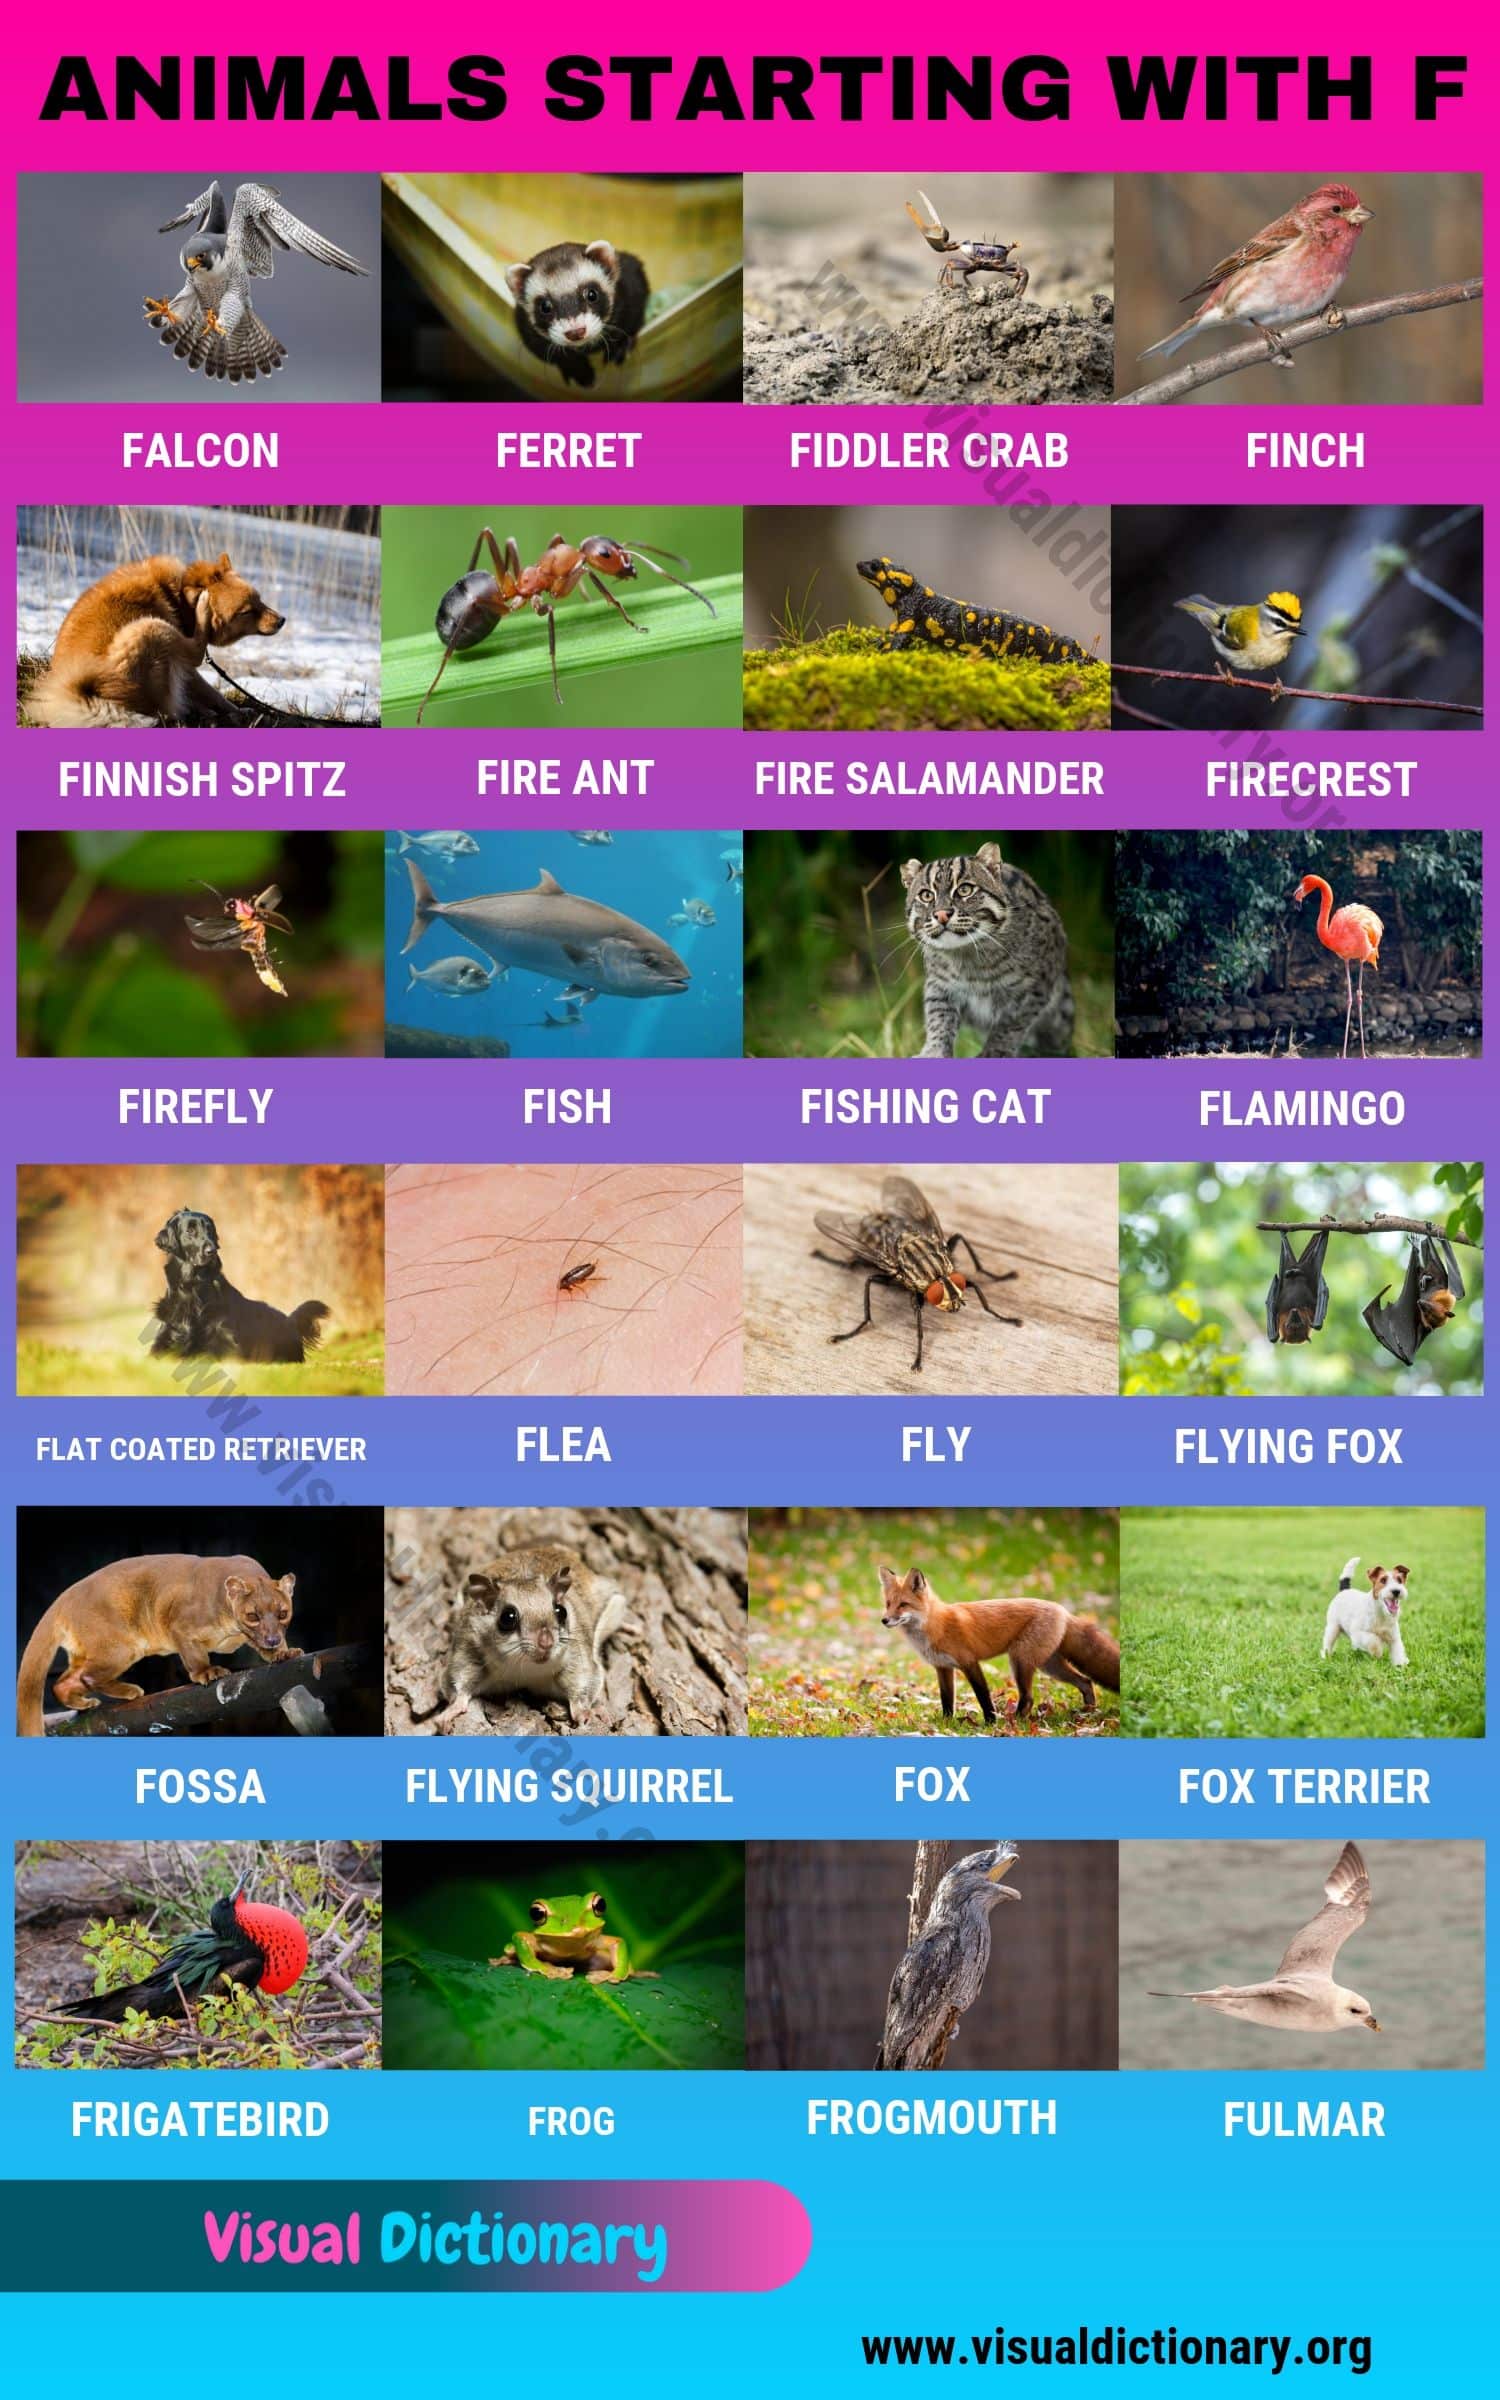 Animals That Start With F 24 Popular Animals Starting With F Visual Dictionary